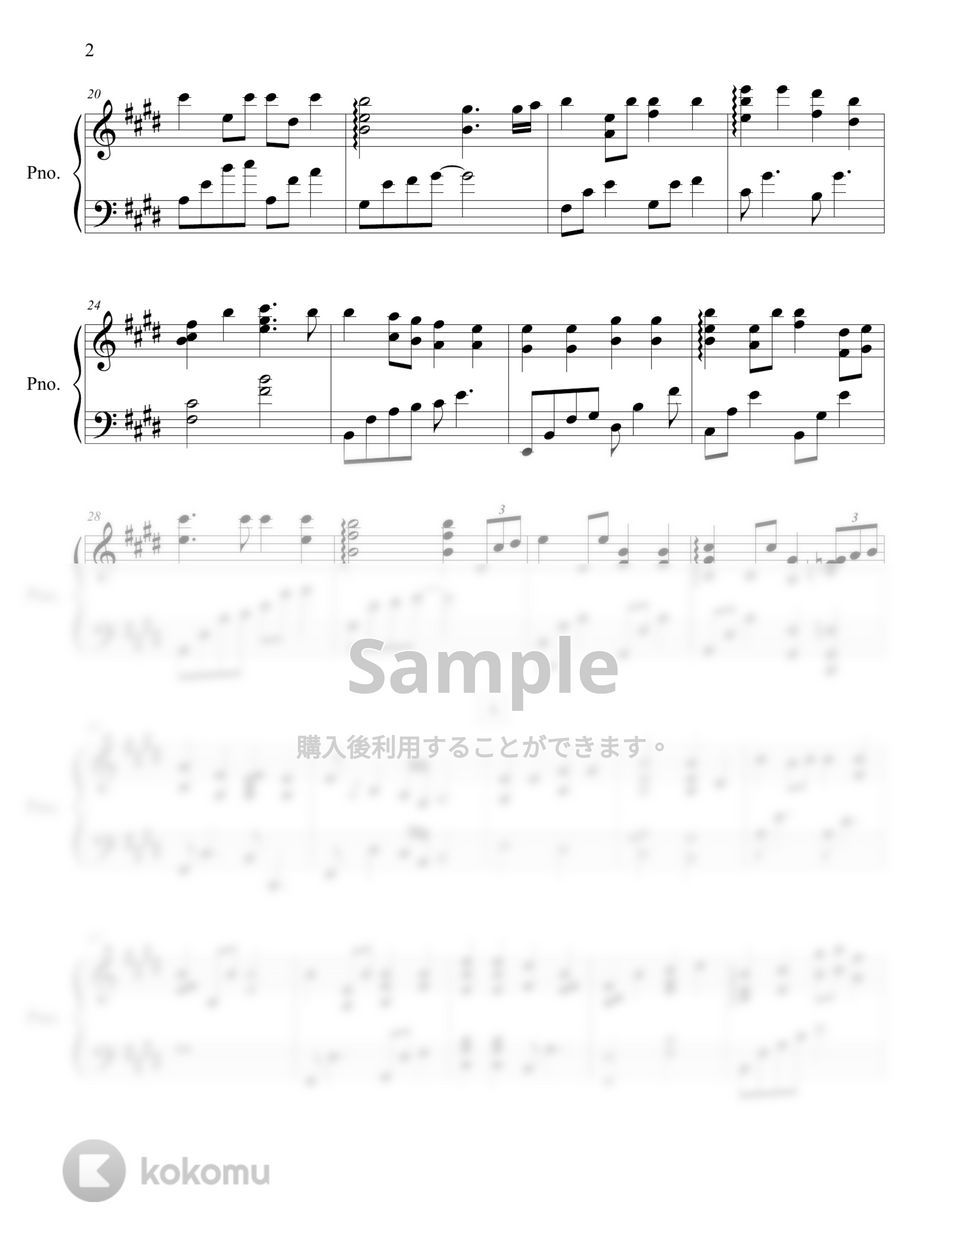 Hymn 8 - Holy Holy Holy by Pianist Keunyoung Song(송근영)